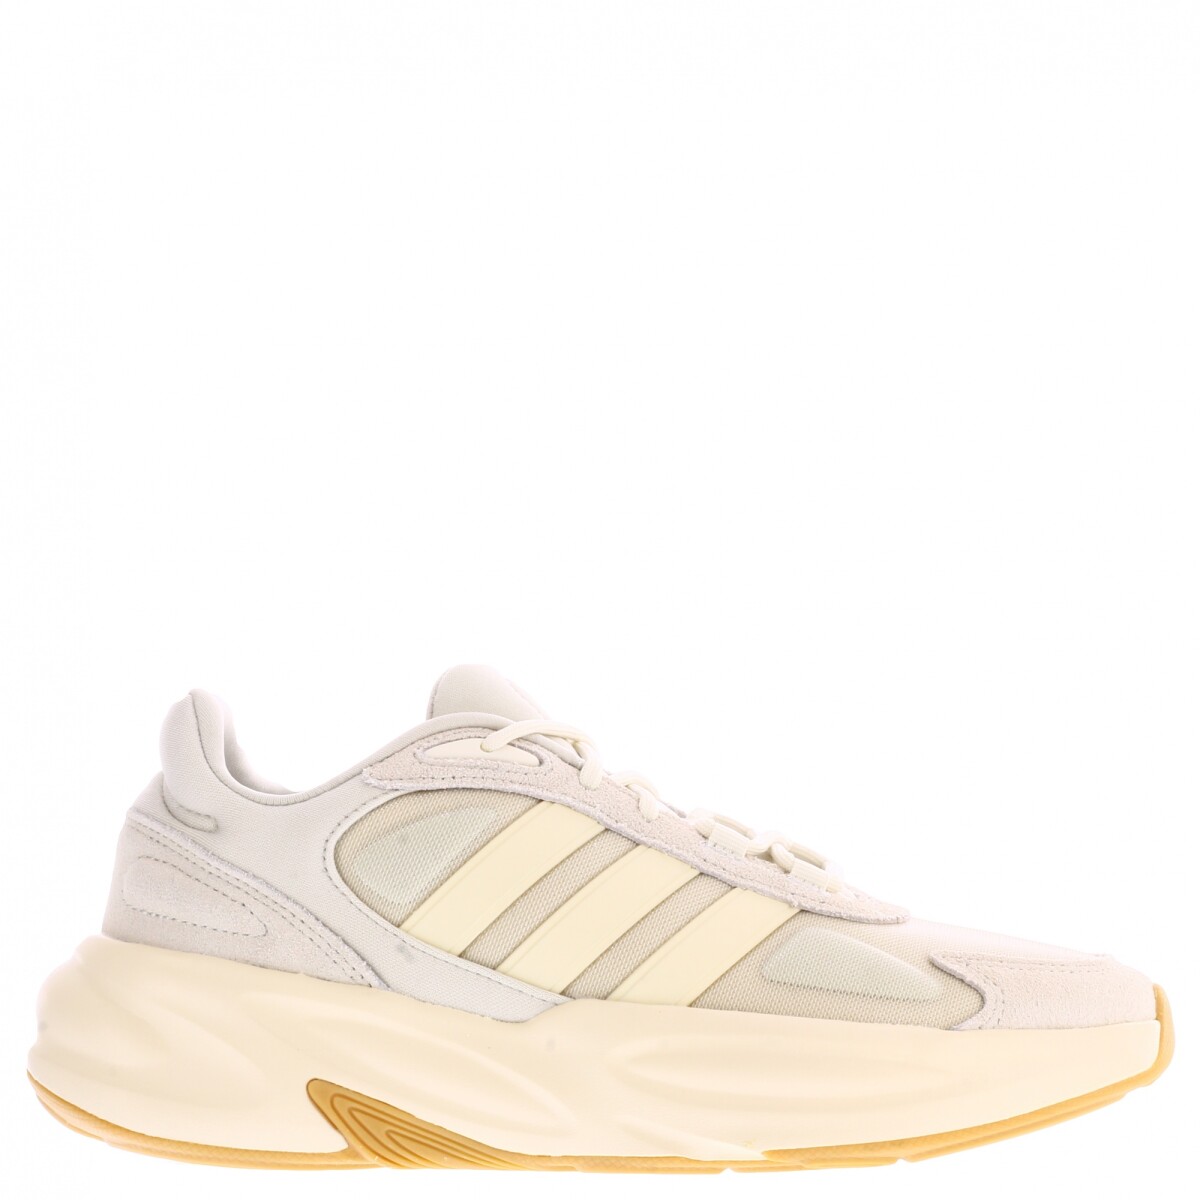 Ozolle Cloudfoam Adidas - Natural/Beige 